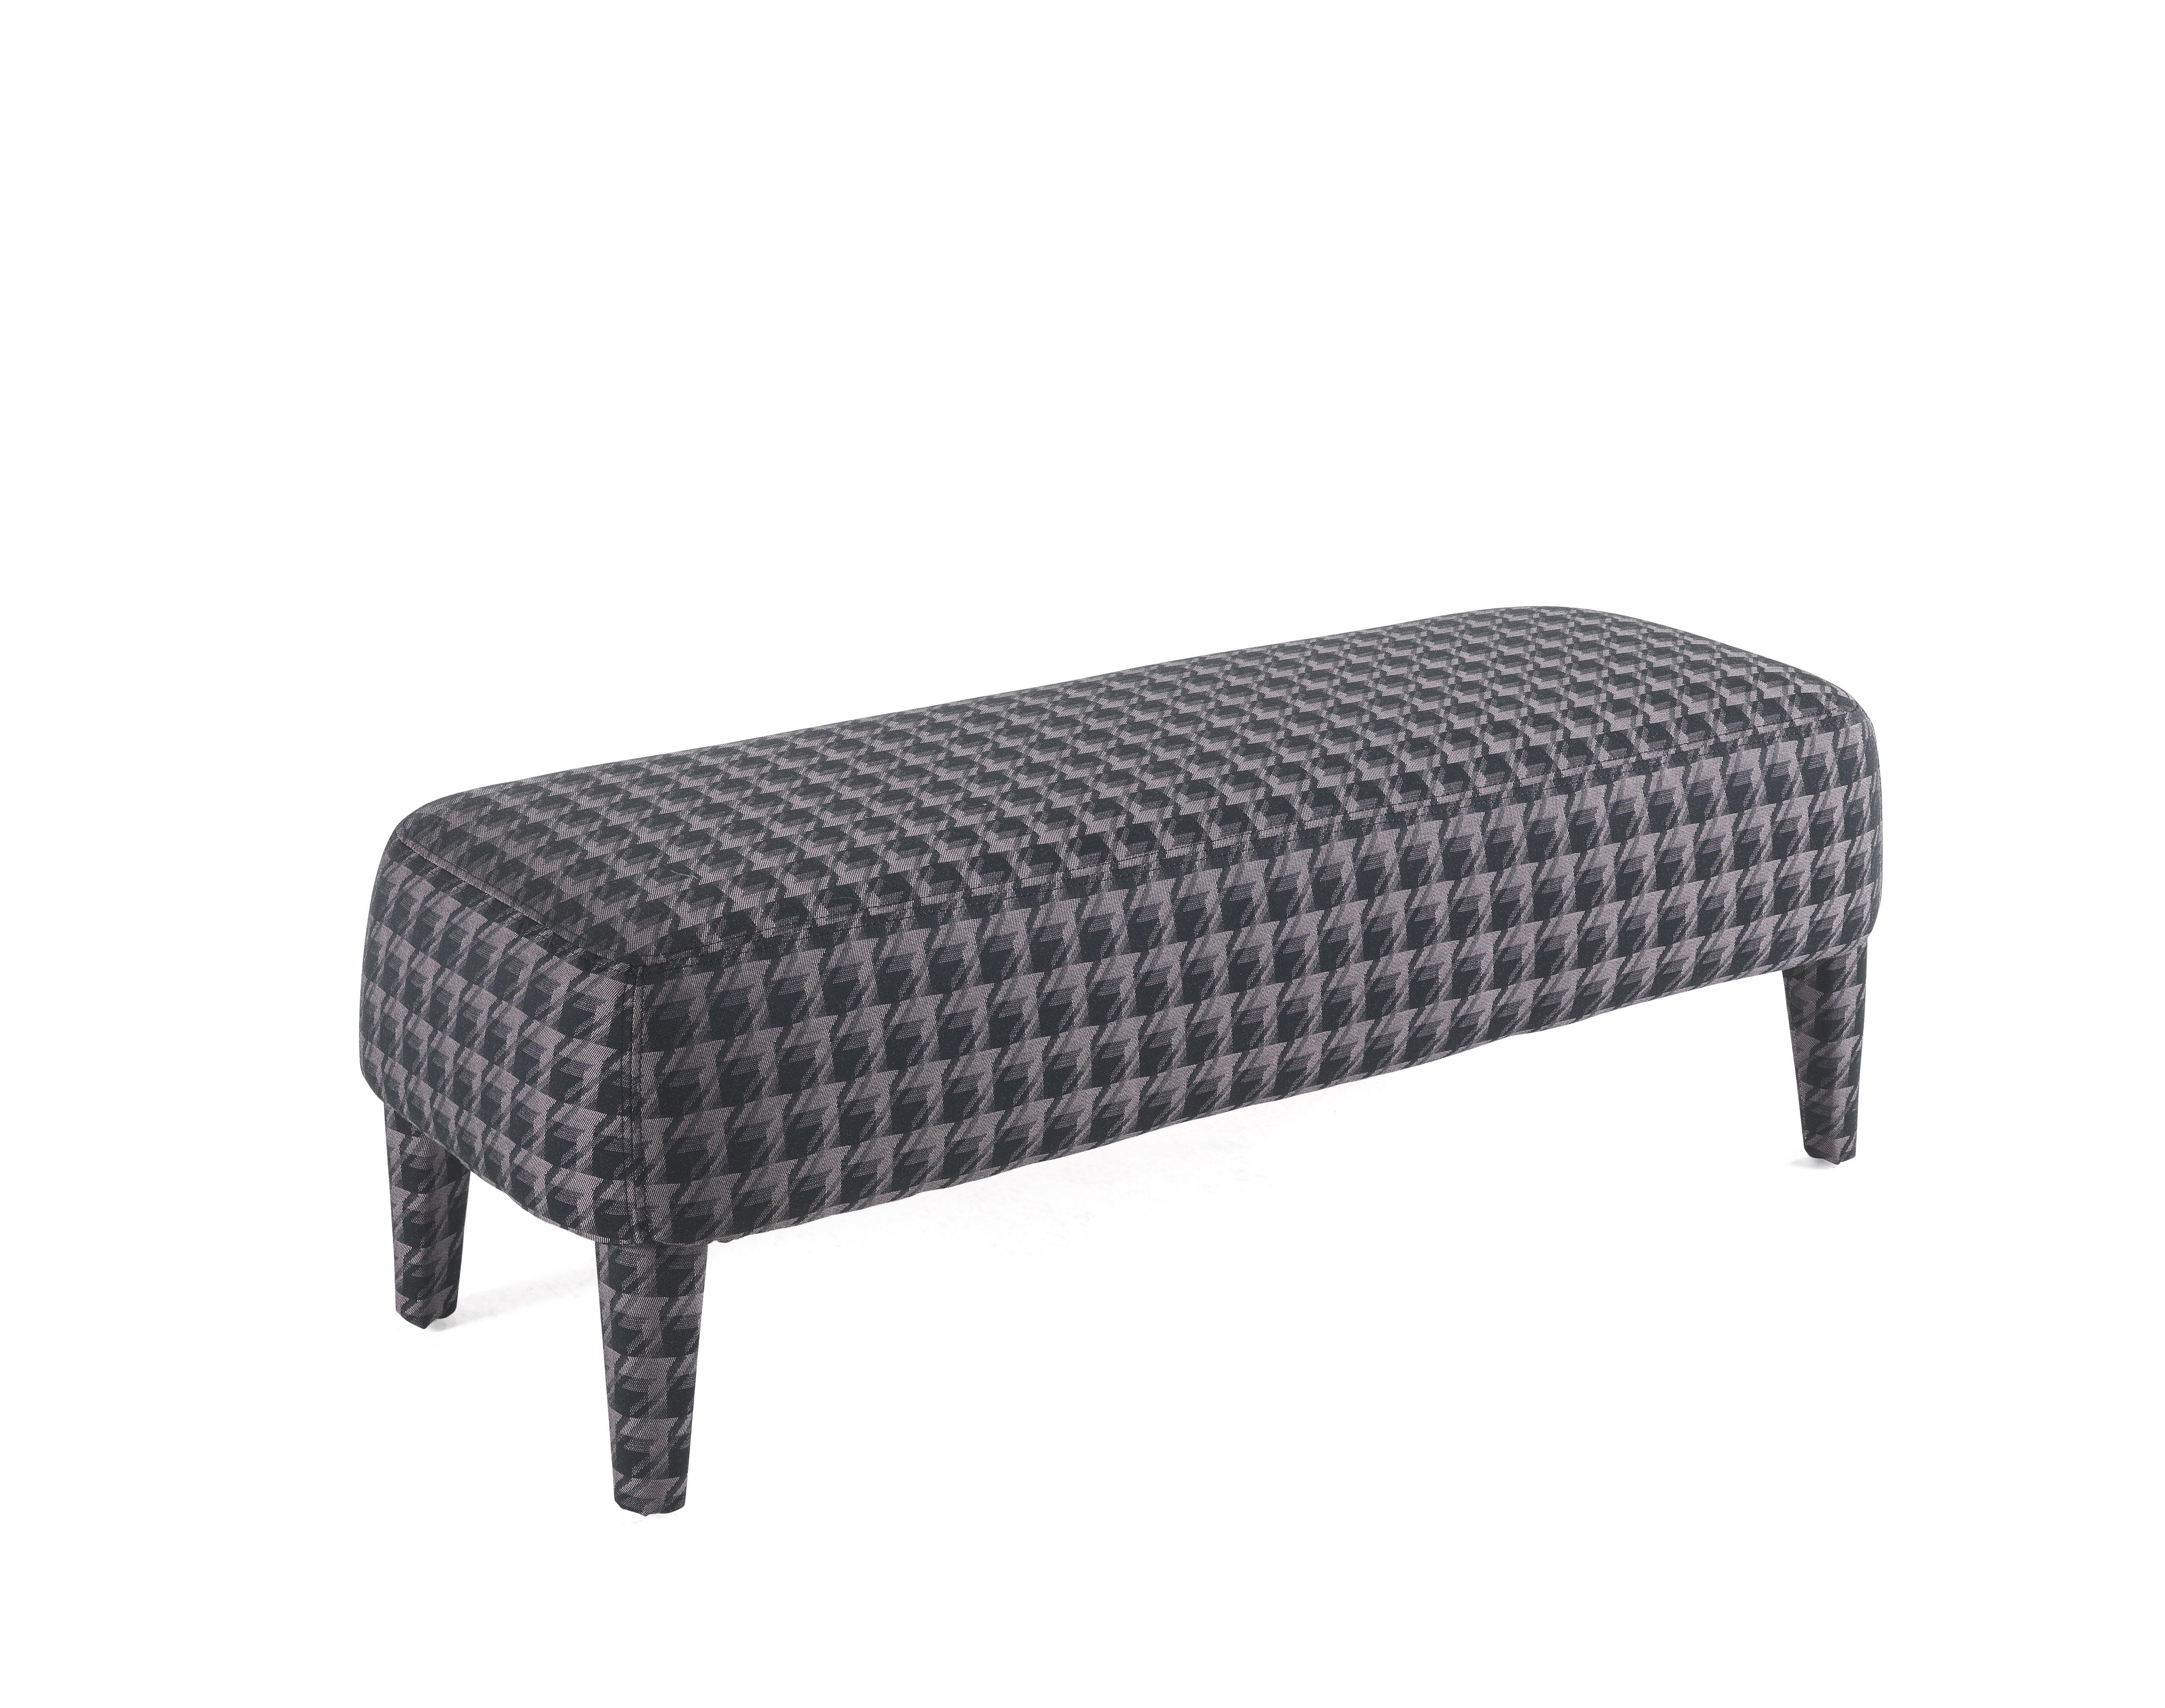 The mini pouf features a light and versatile design. Small, soft and compact, it adds character to any setting. Available in different menswear fabrics of the collection: pied-de-poule, pinstripe, twill, Prince of Wales.
Mini bench with structure in